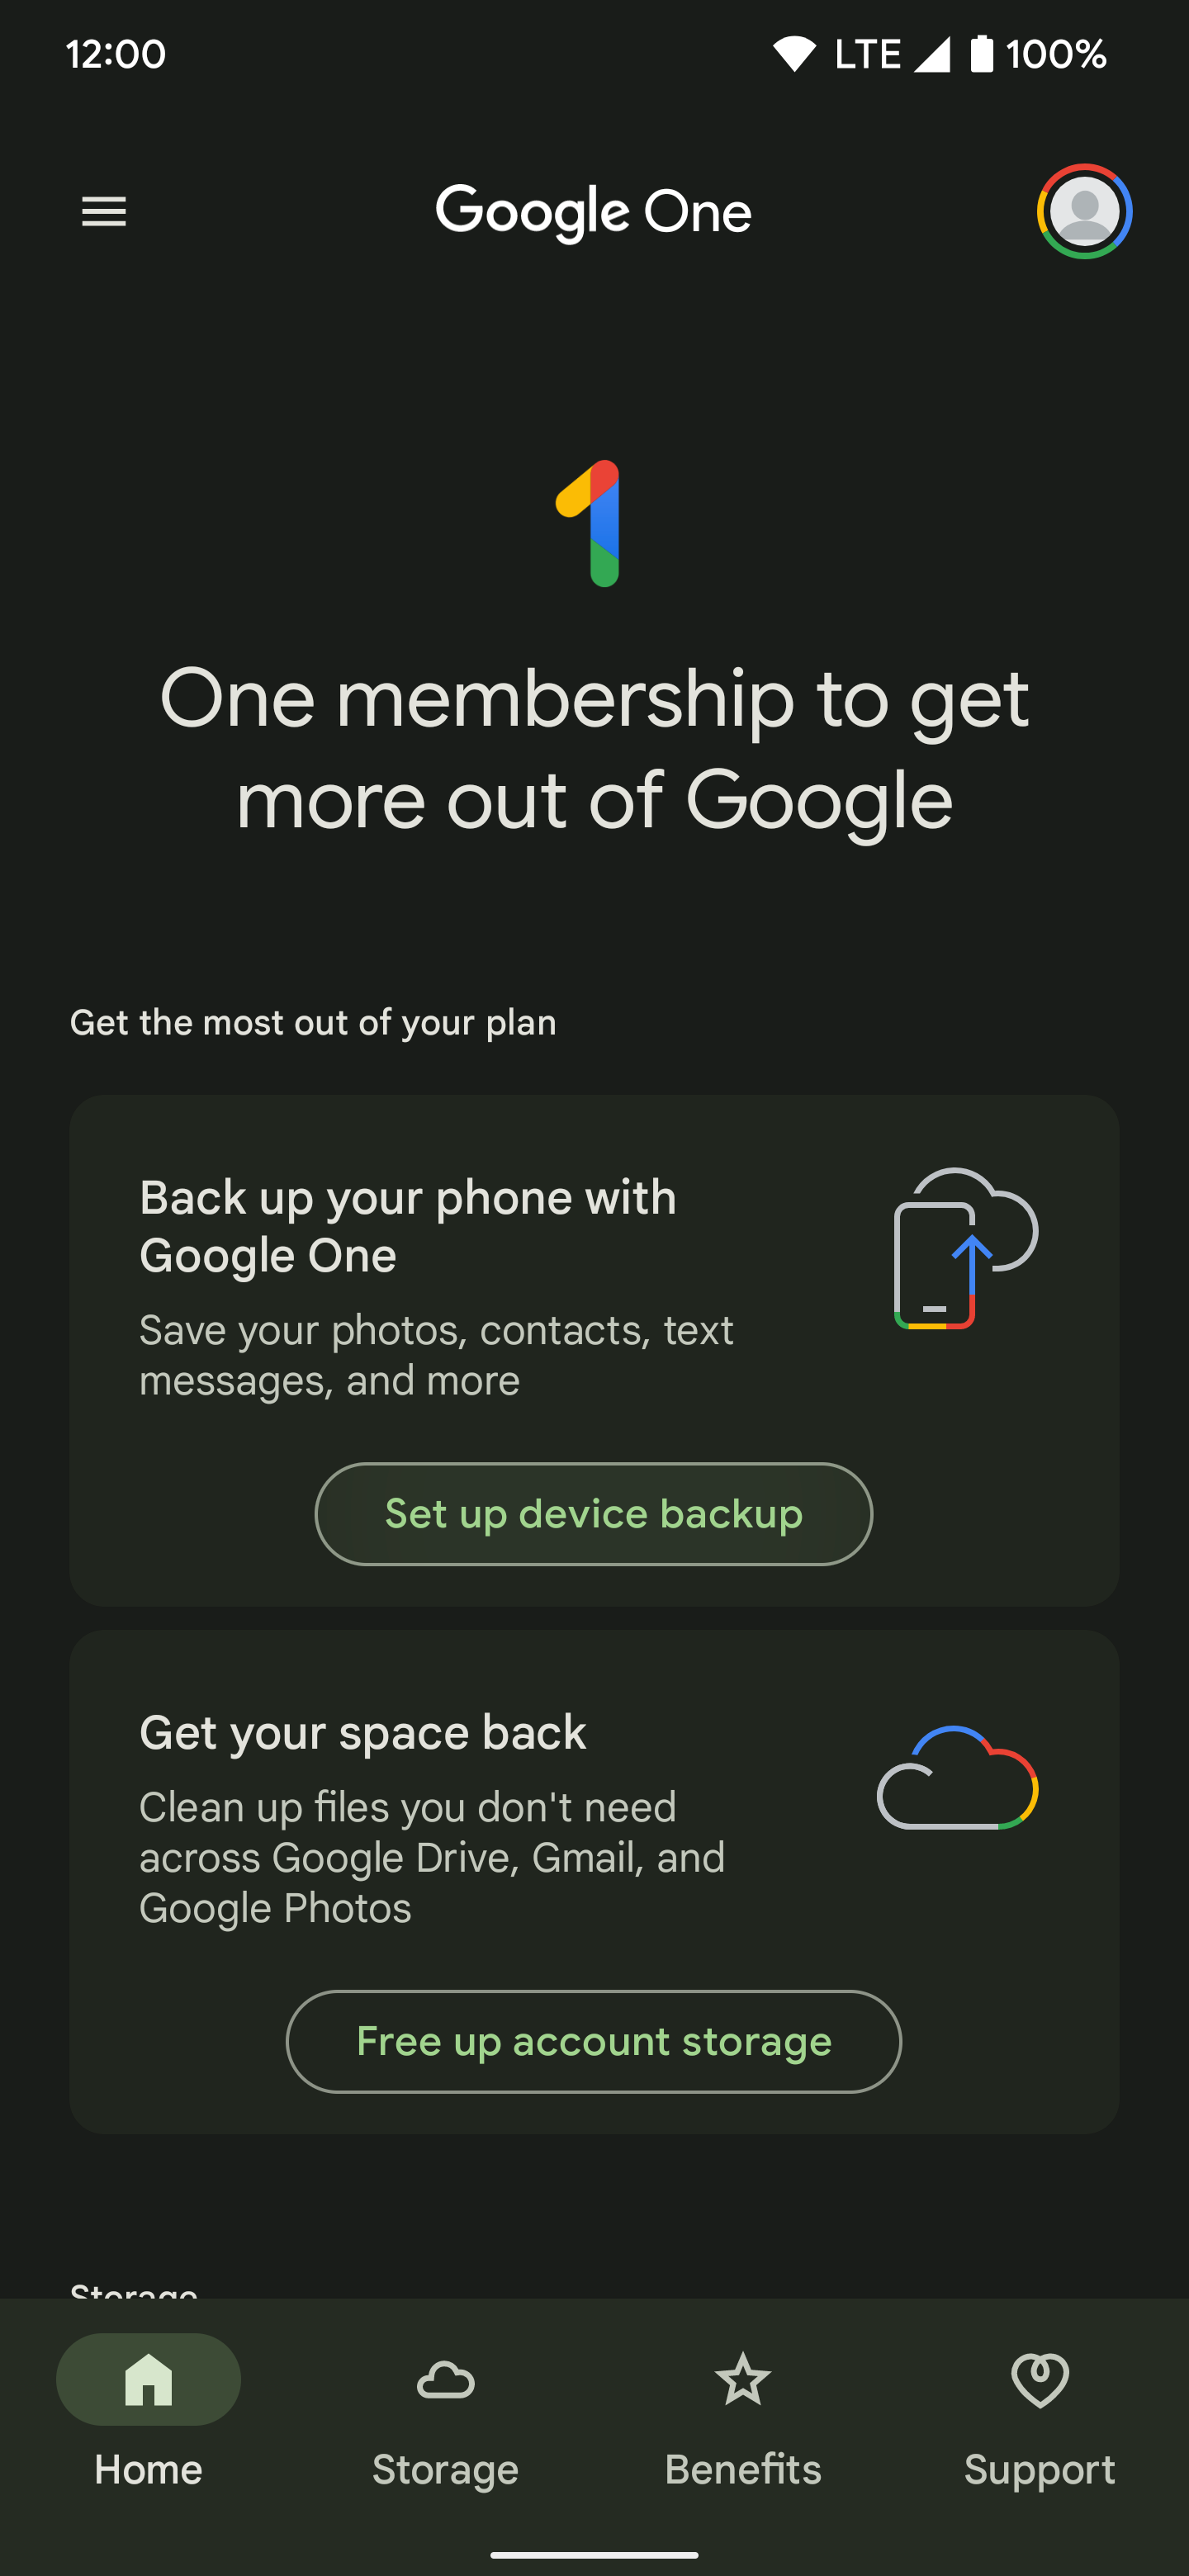 The main home screen on the Google One app